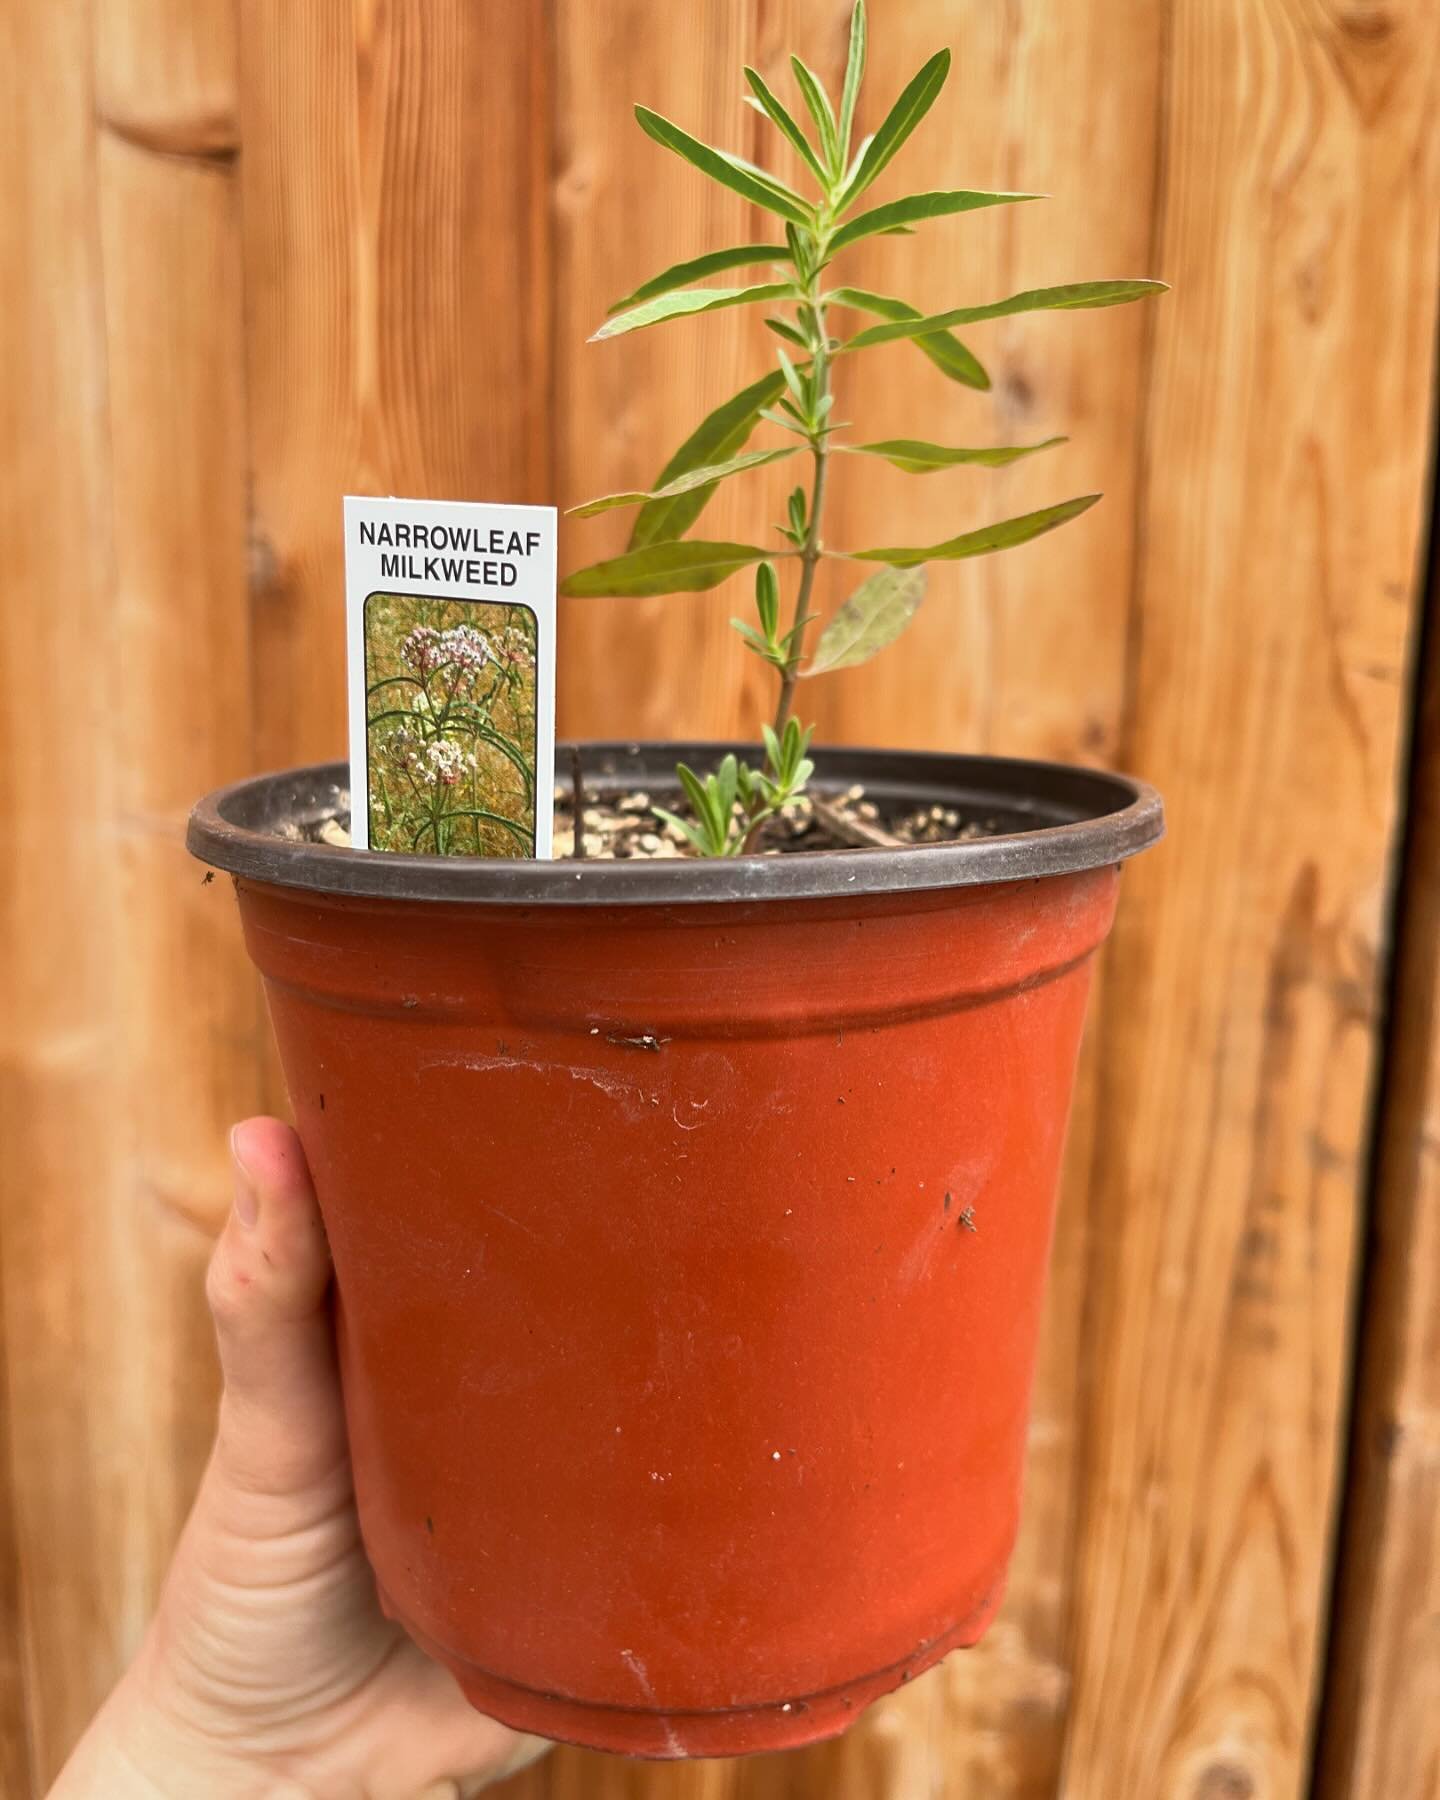 The wait is over - milkweed is here! Asclepias fascicularis aka narrow leaf milkweed plays a crucial role in Monarch butterfly conservation by acting as a larval host plant, providing a place for Monarch butterflies to lay their eggs and food for the